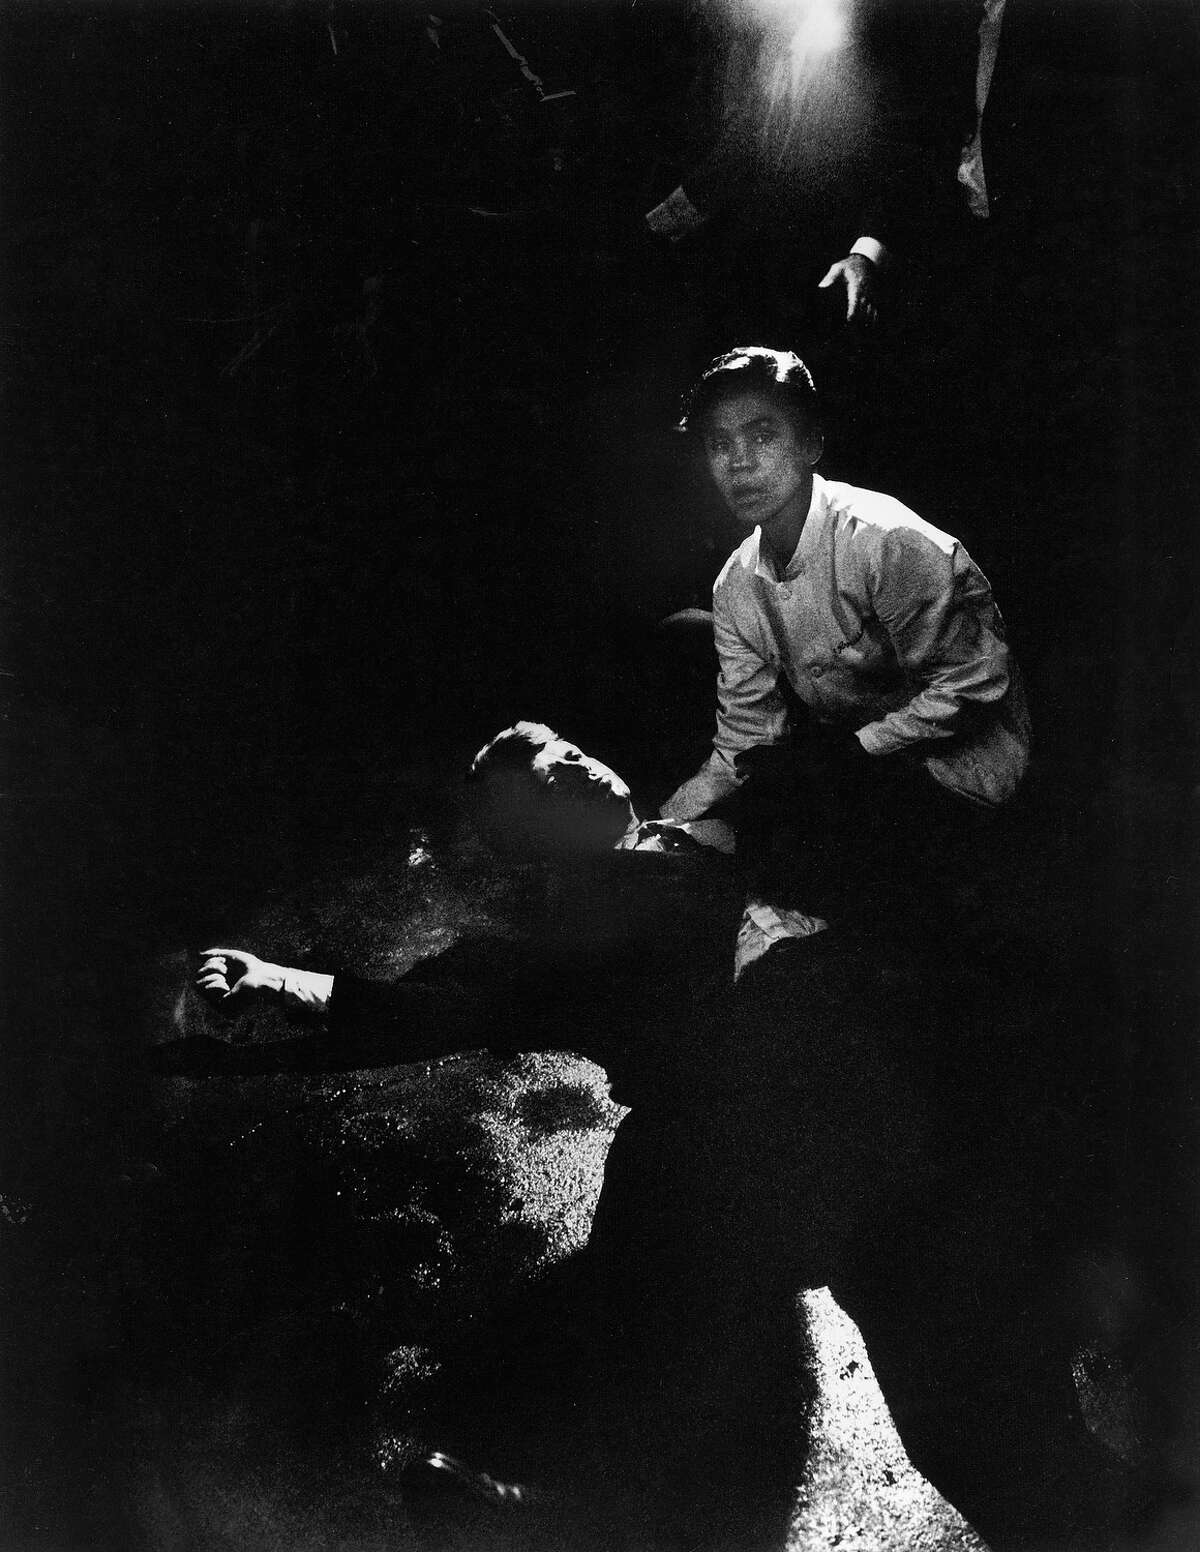 Senator Robert Kennedy sprawled semiconscious in his own blood on floor after being shot in the brain & neck while busboy Juan Romero tries to comfort him, in kitchen at hotel.